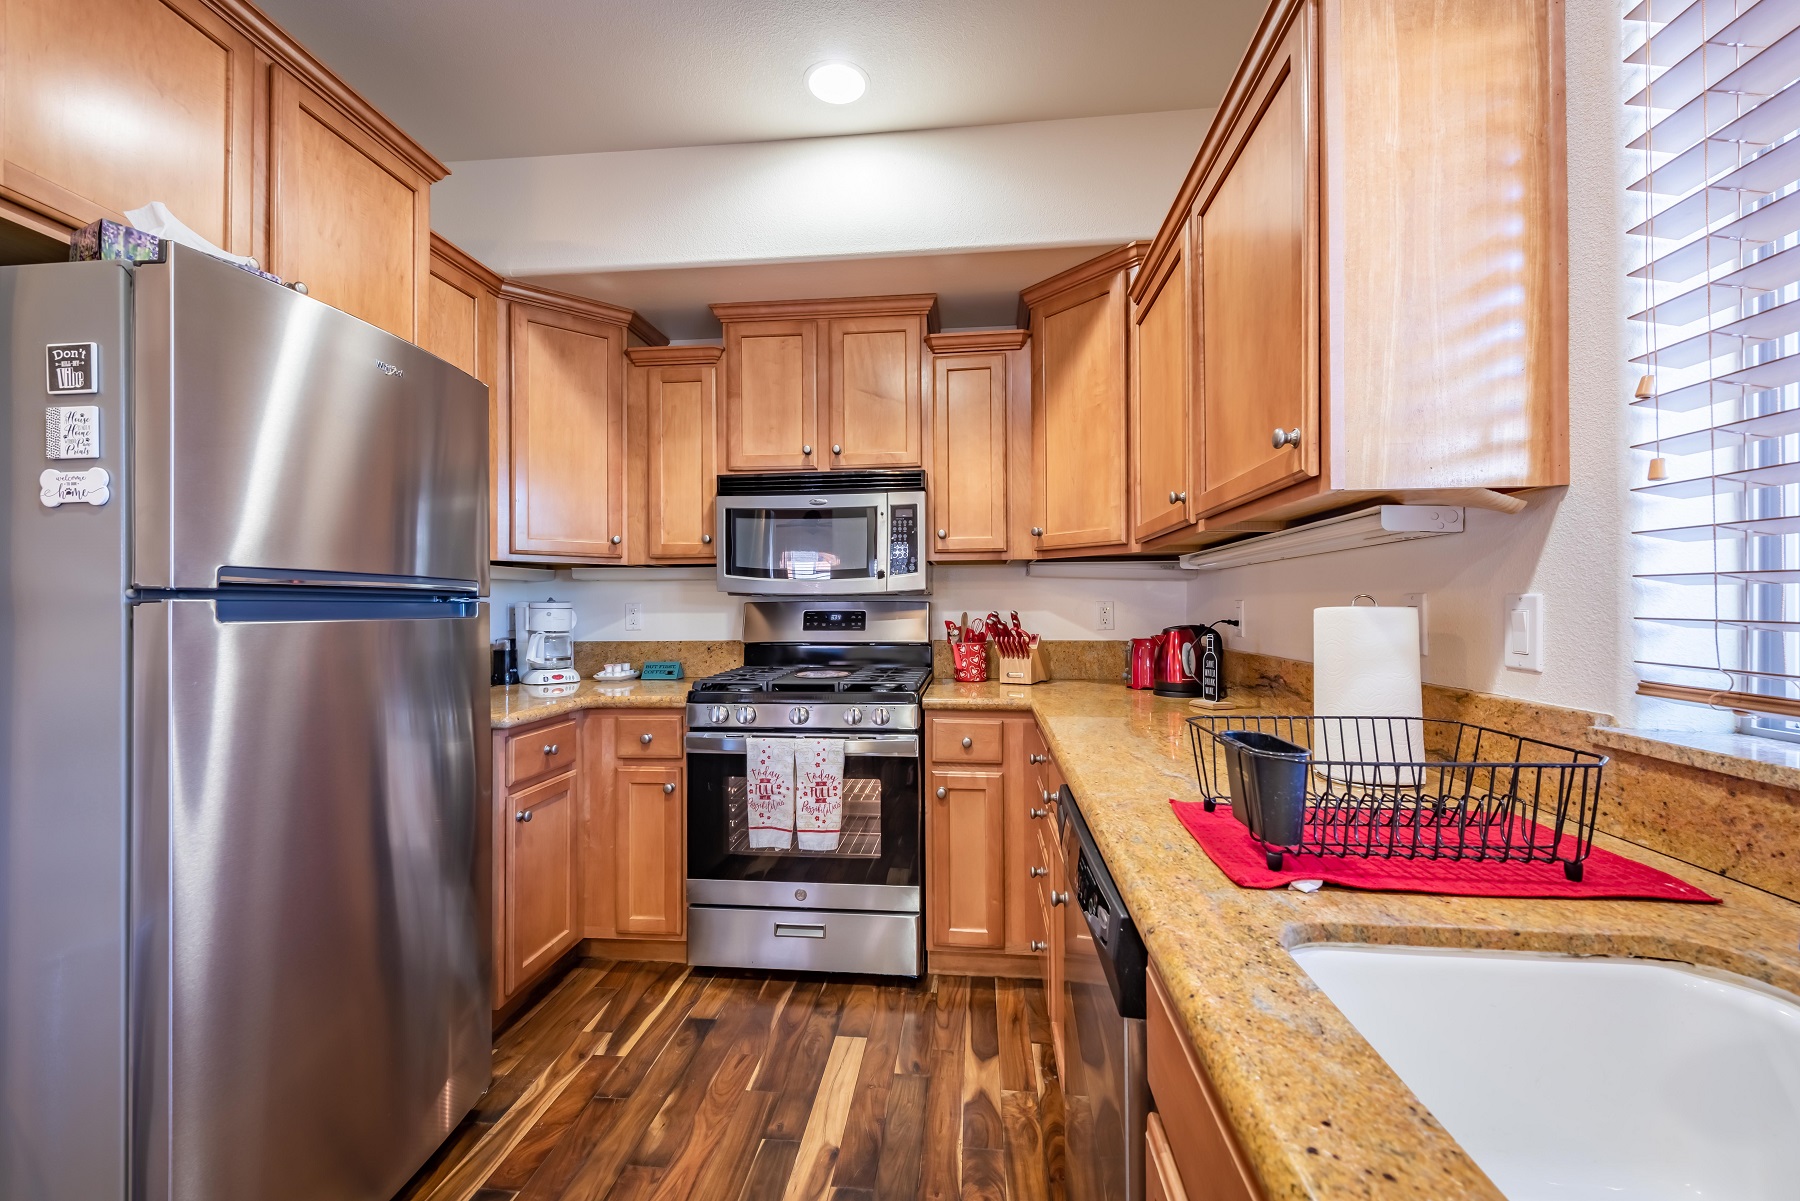 Fully-stocked kitchen with stainless steel appliances.